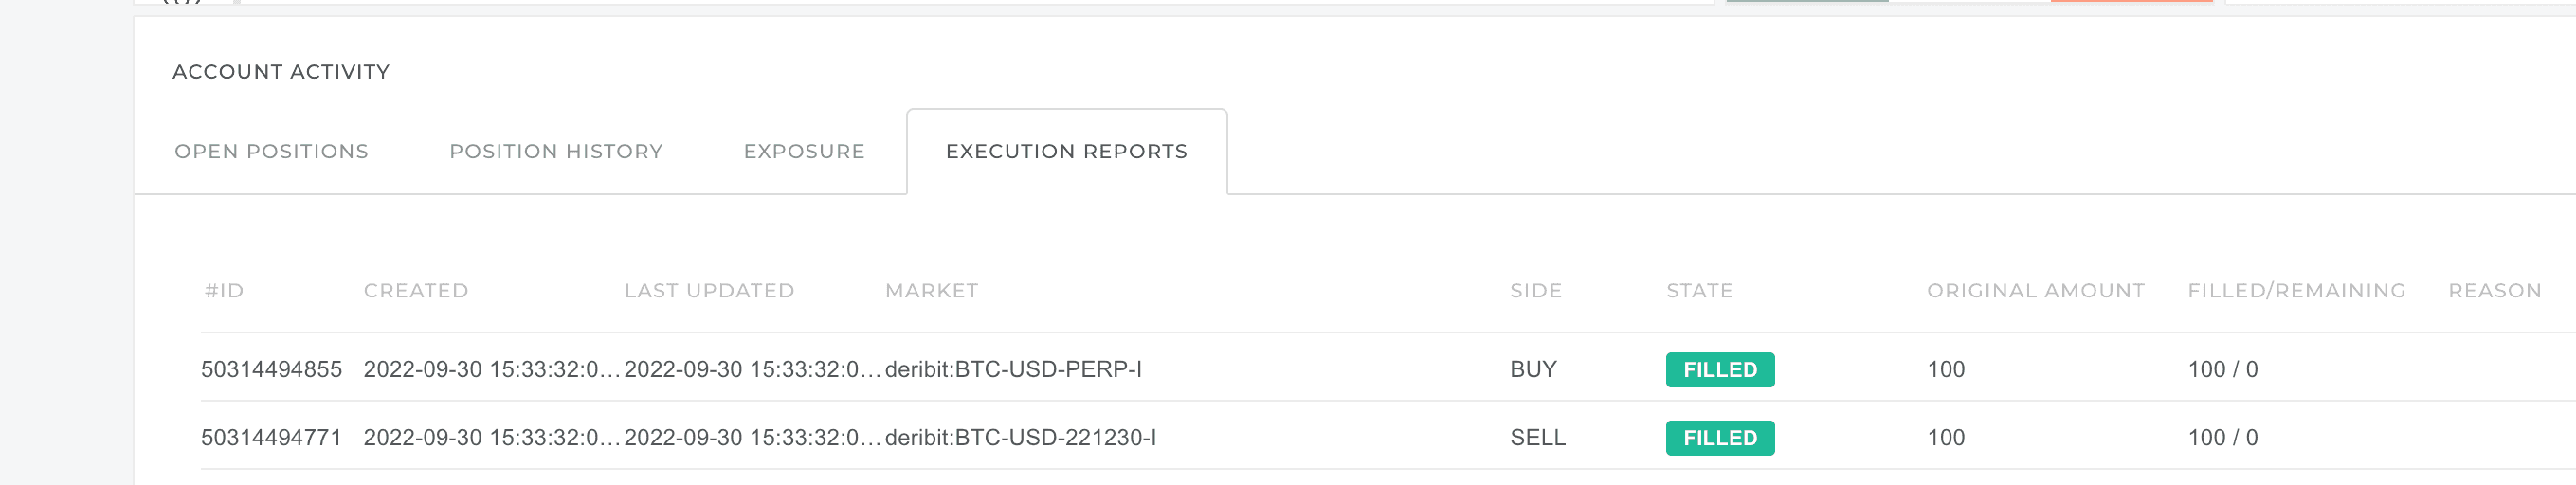 Spread execution reports